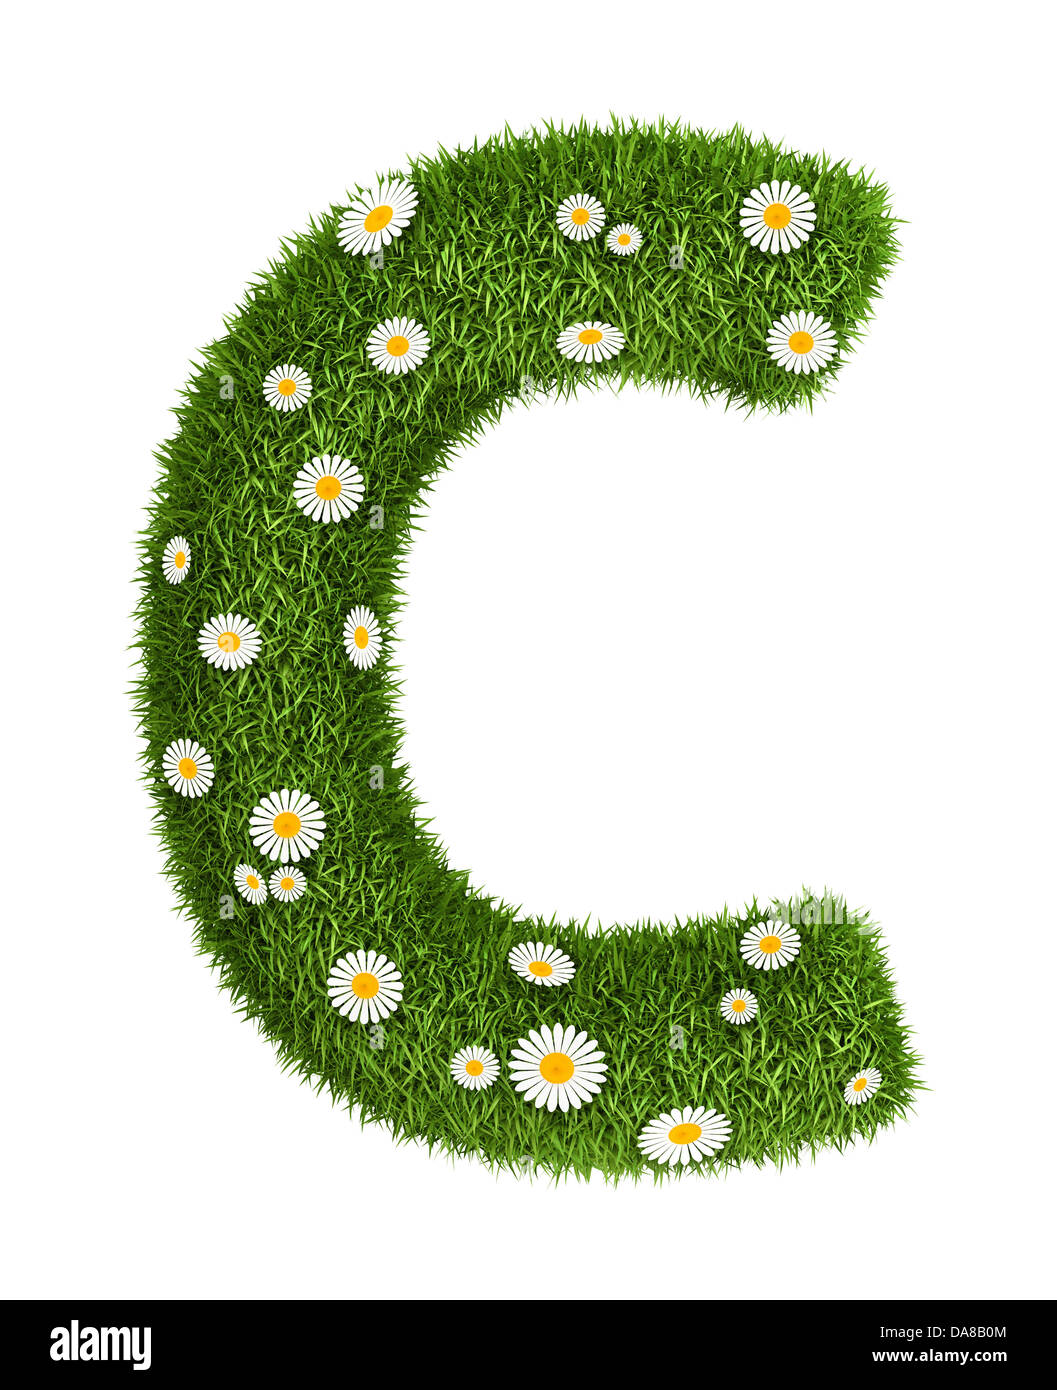 Natural grass letter C Stock Photo